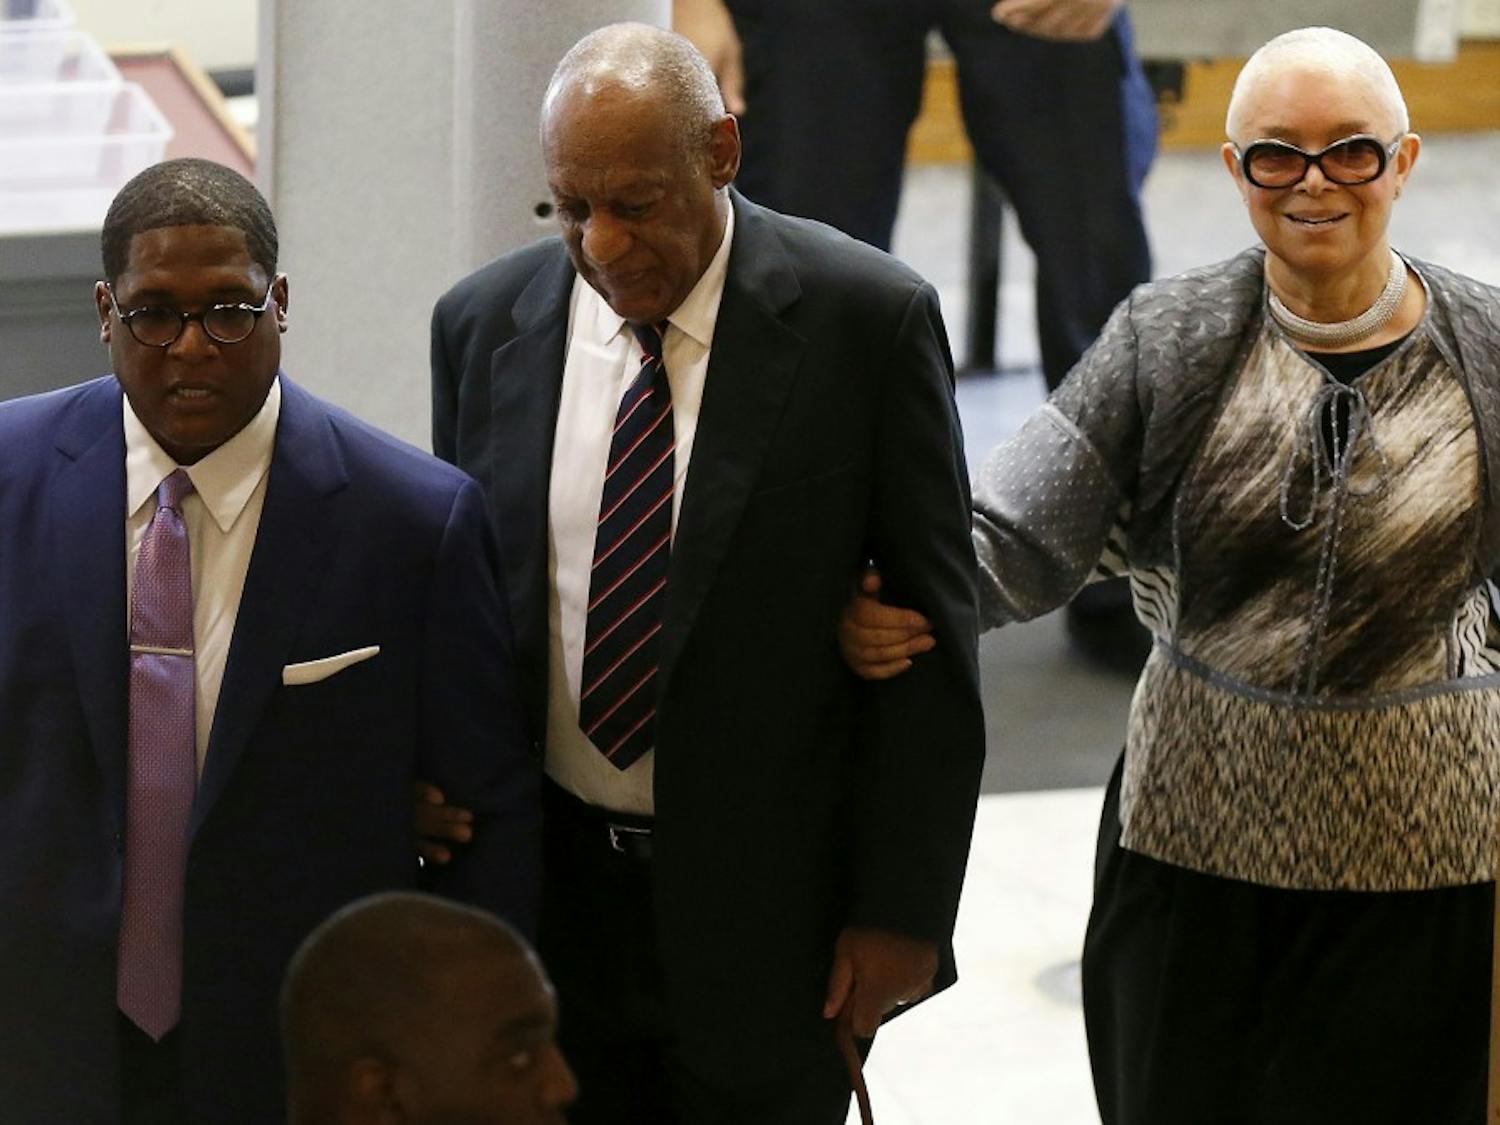 Cosby opts not to testify as defense rests